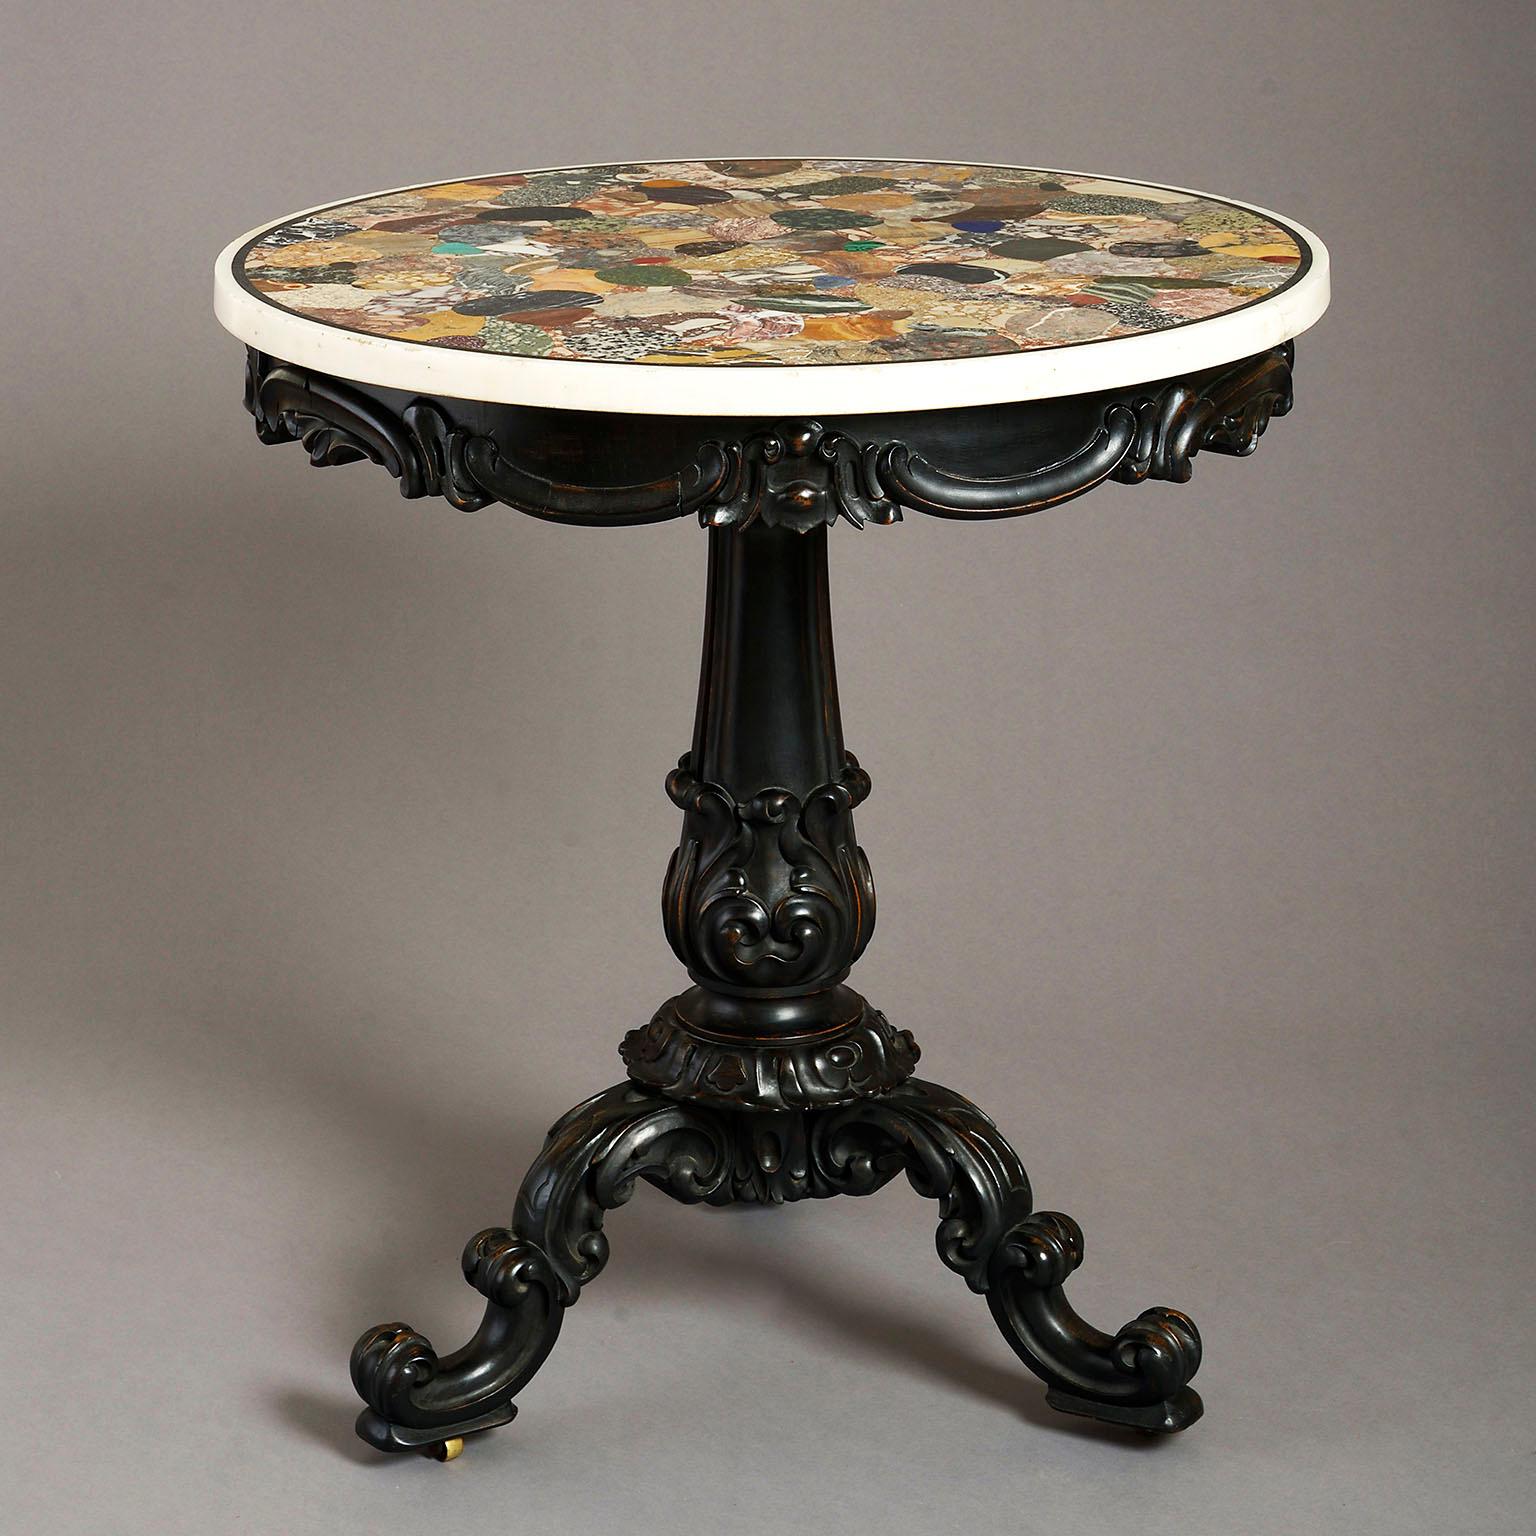 A 19th century specimen marble centre table, the circular top inlaid with a pavement of irregular specimen marbles including, amongst others, Egyptian Alabaster, Carnelian, Malachite, Green Porphyry and Cipollino Verde above a C-scroll carved